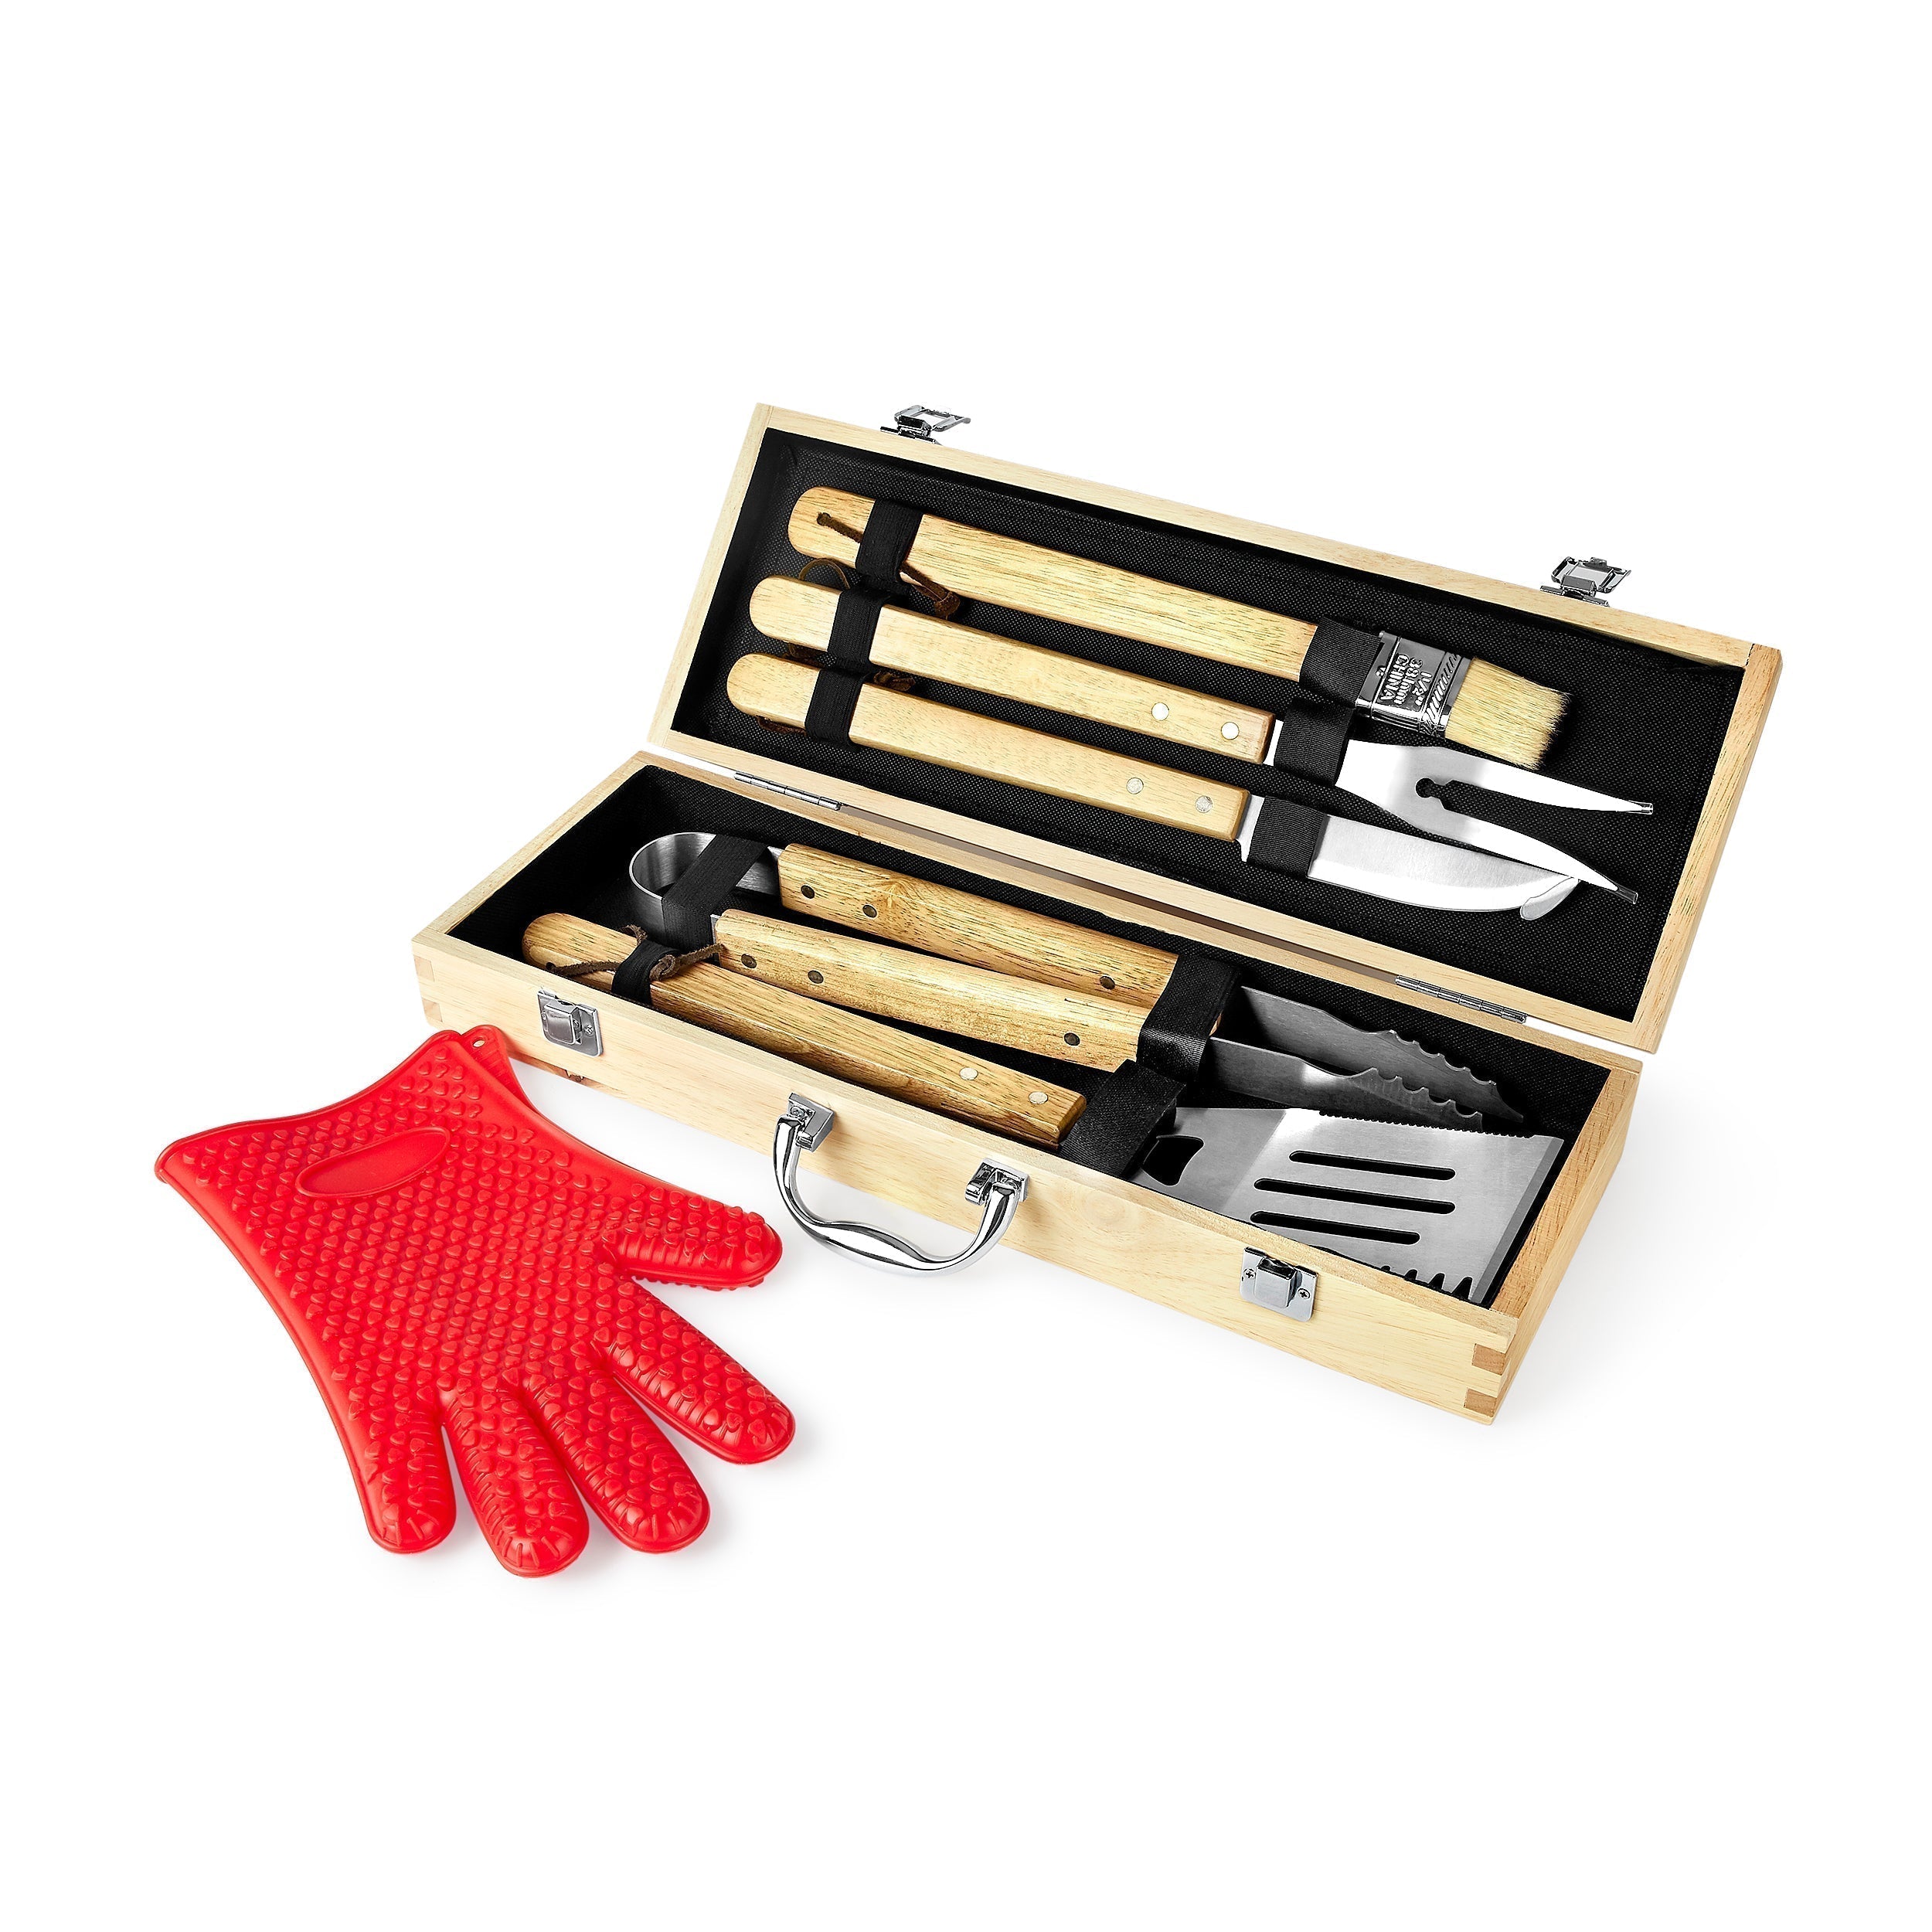 11 Piece BBQ Grill Set - The Grillfather